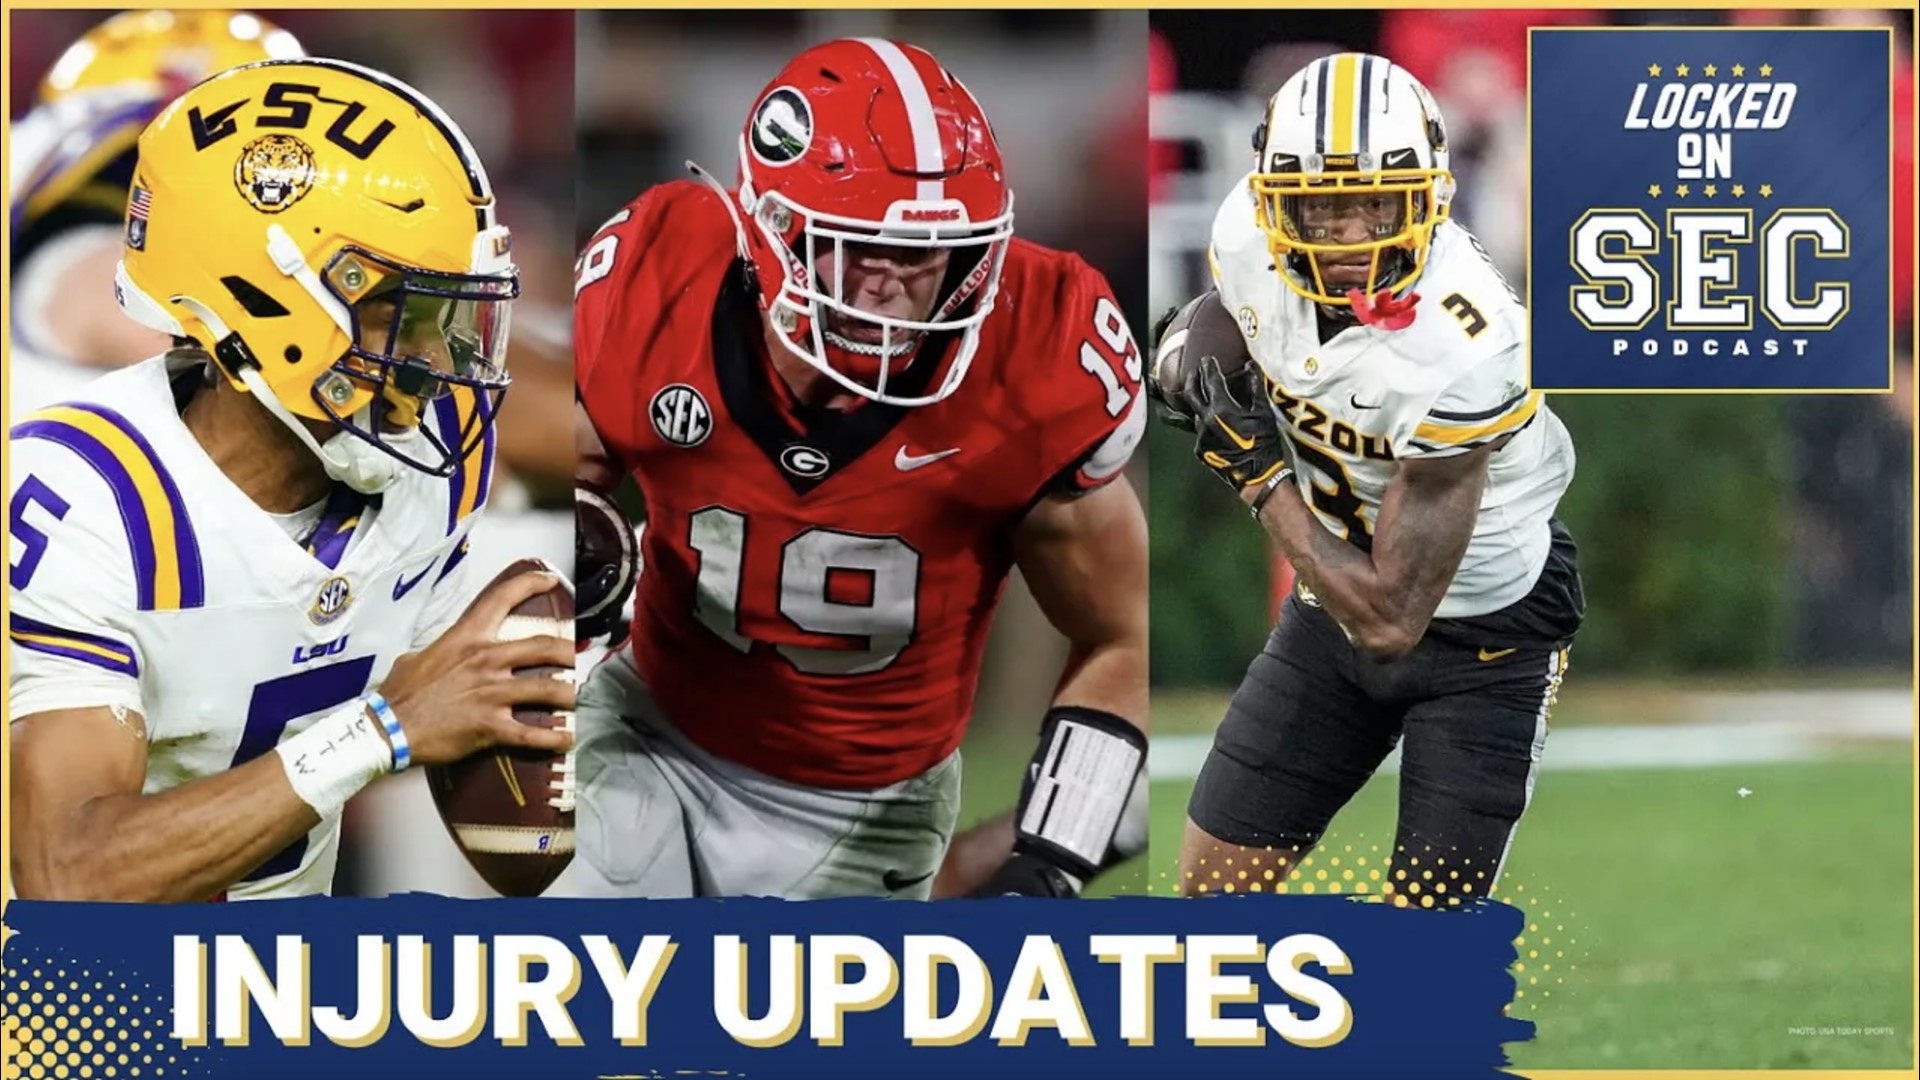 On today's show, we run through the latest on some of the biggest injuries in the SEC - could we be getting close to seeing Brock Bowers return to the field?